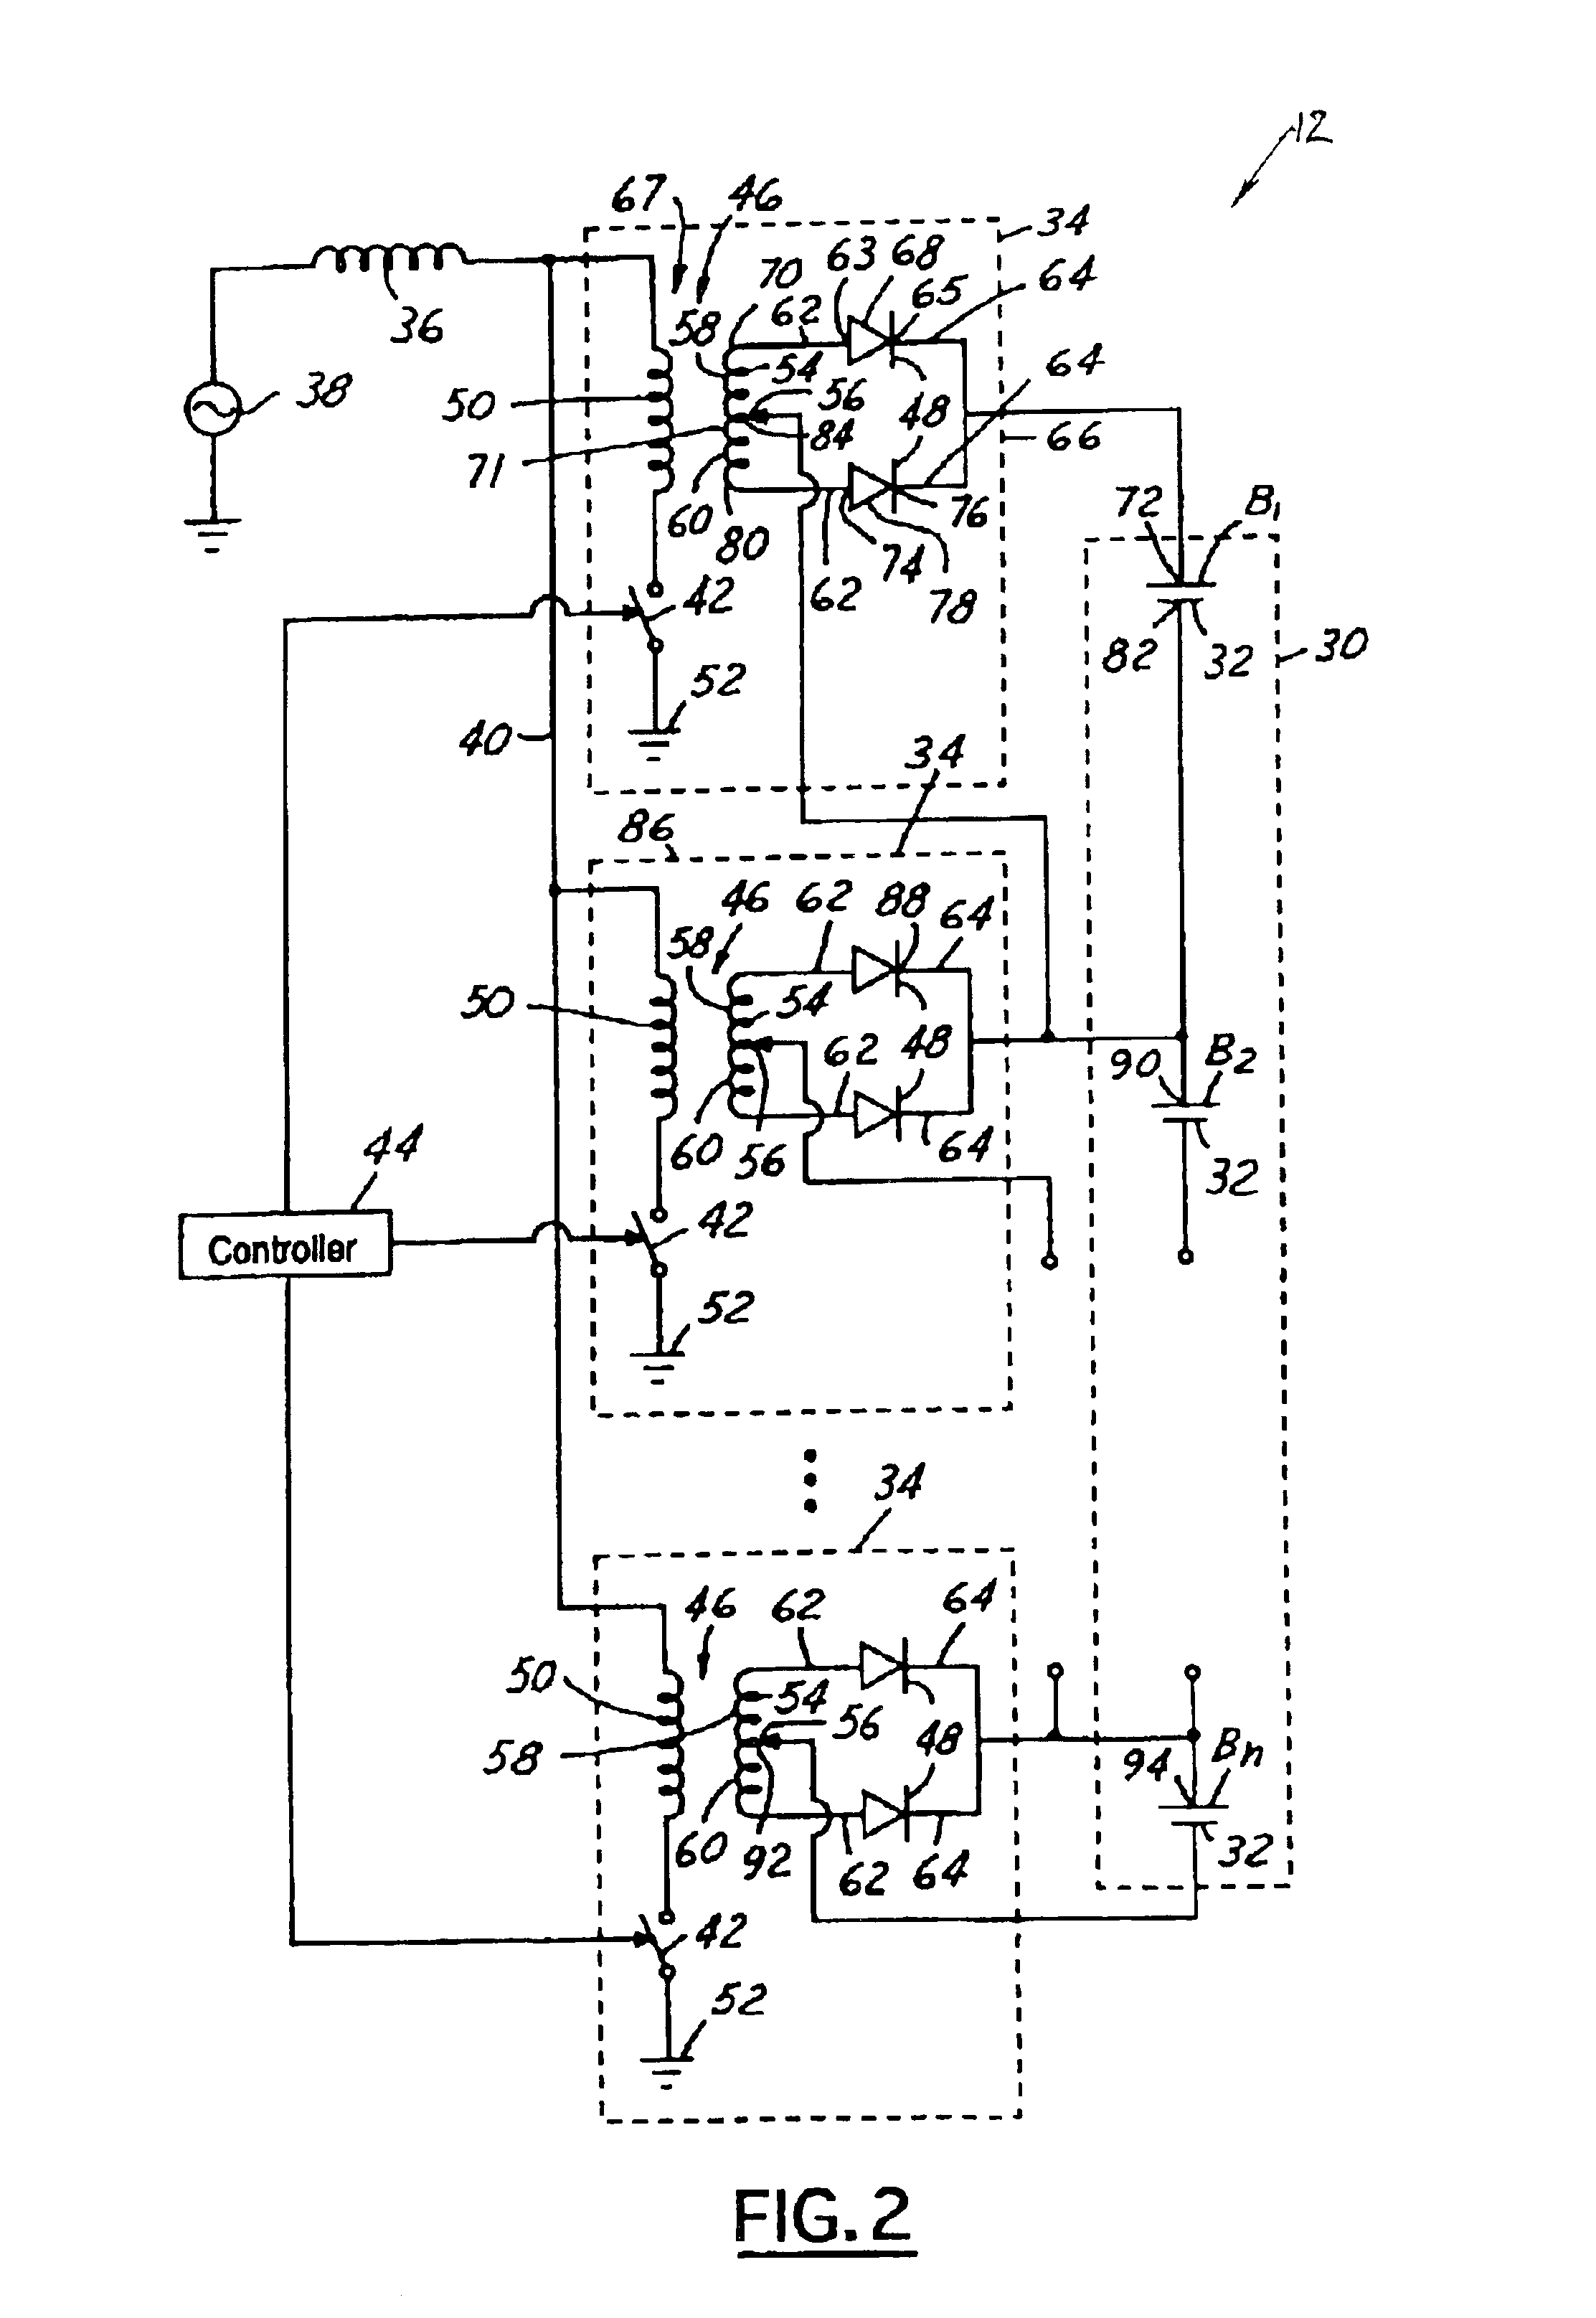 Battery cell balancing system